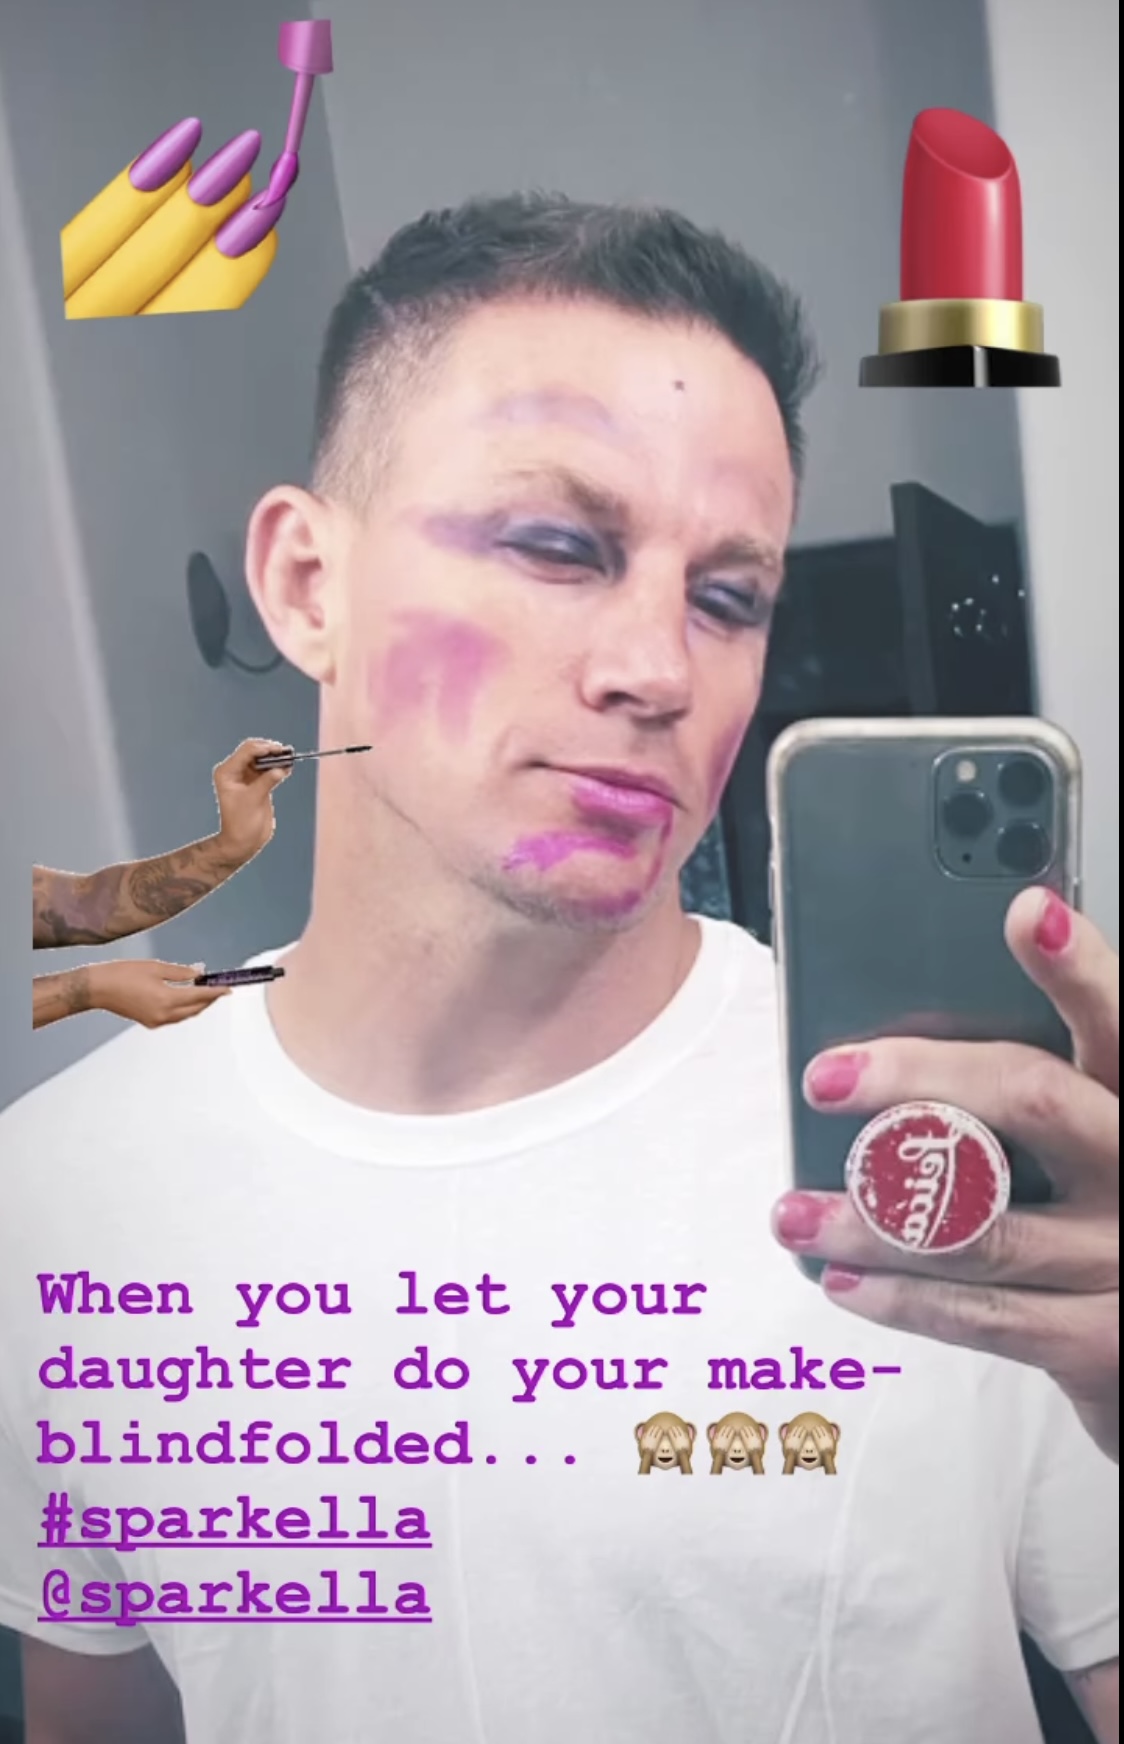 Channing Tatum’s Daughter Does His Makeup Blindfolded — See The HILARIOUS Result!